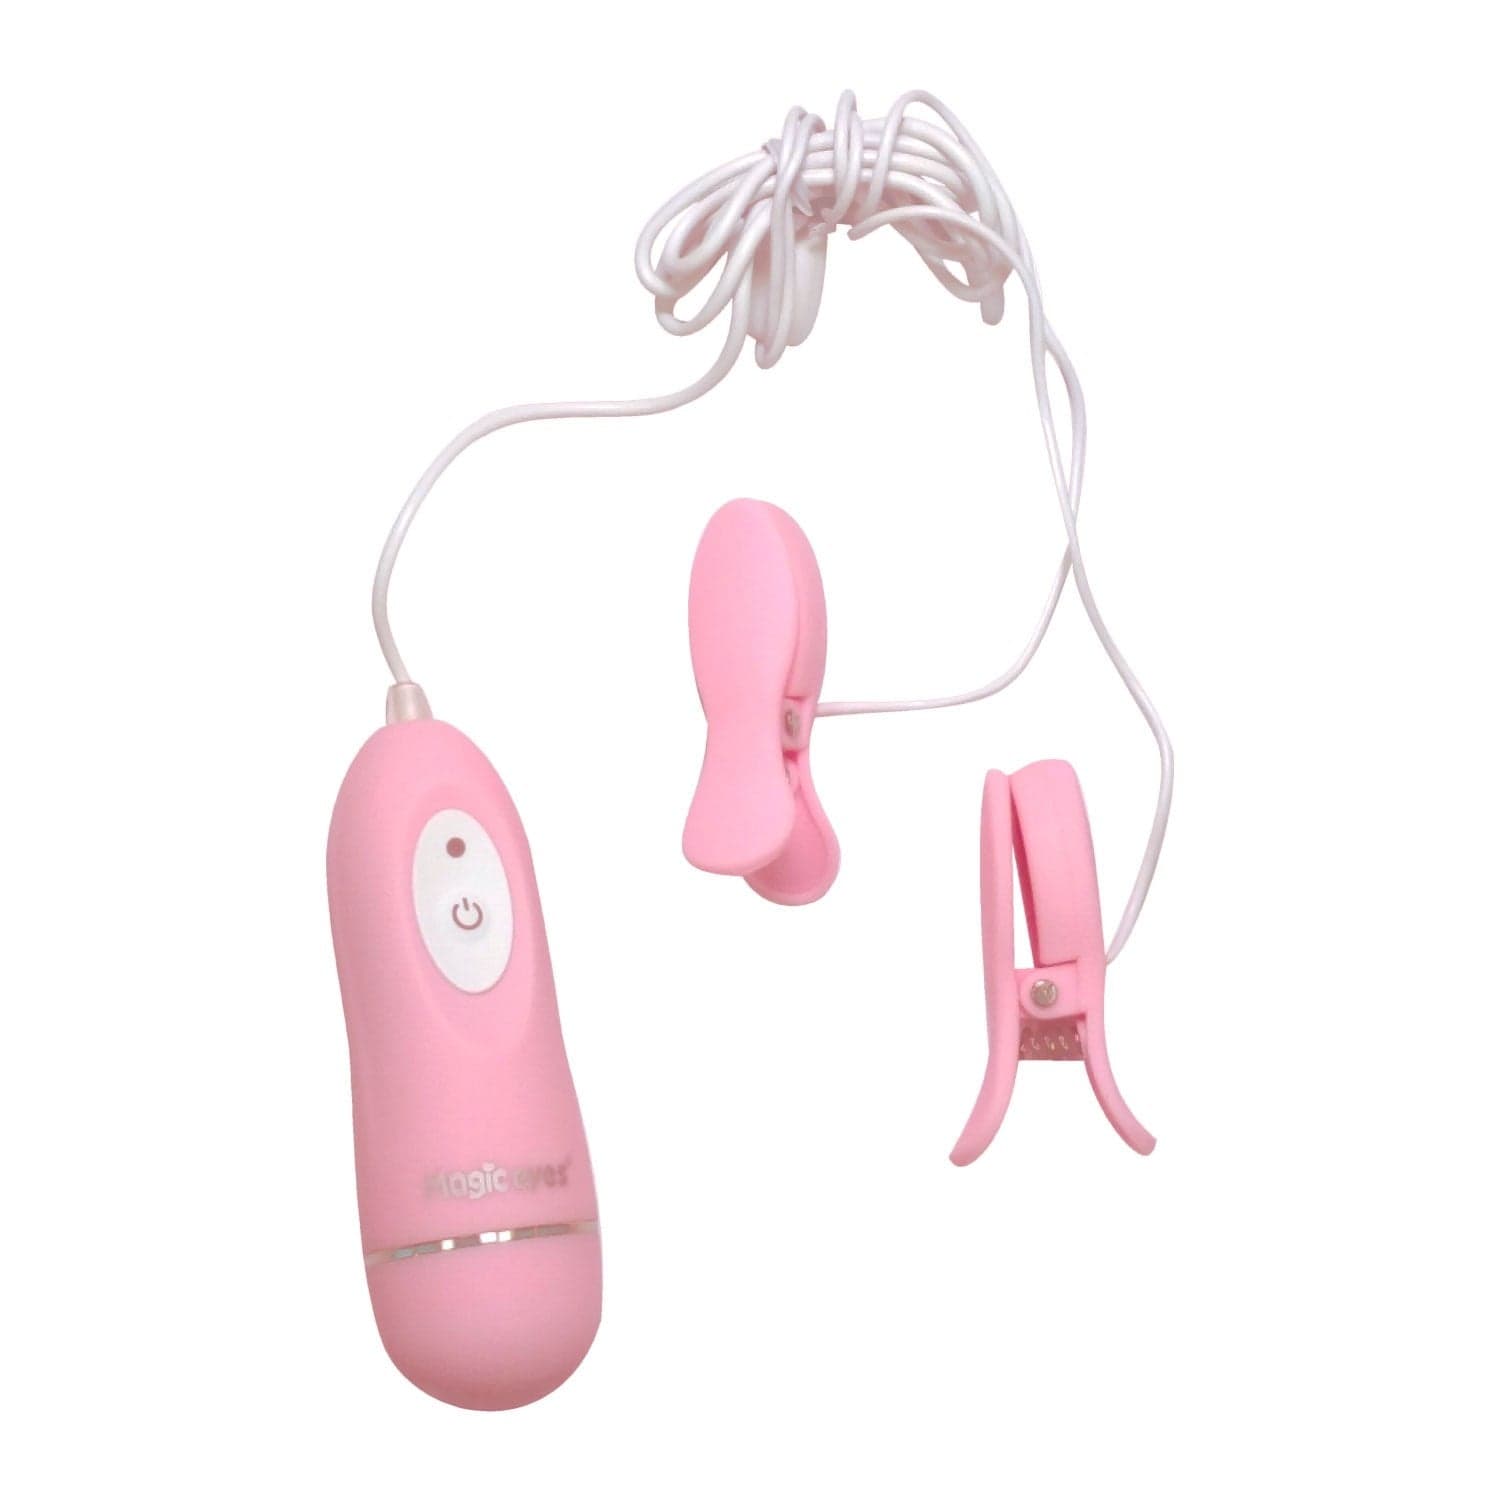 Magic Eyes - Love Pincher Remote Control Vibrating Nipple Clamps (Pink) Nipple Clamps (Vibration) Non Rechargeable 4571324241777 CherryAffairs